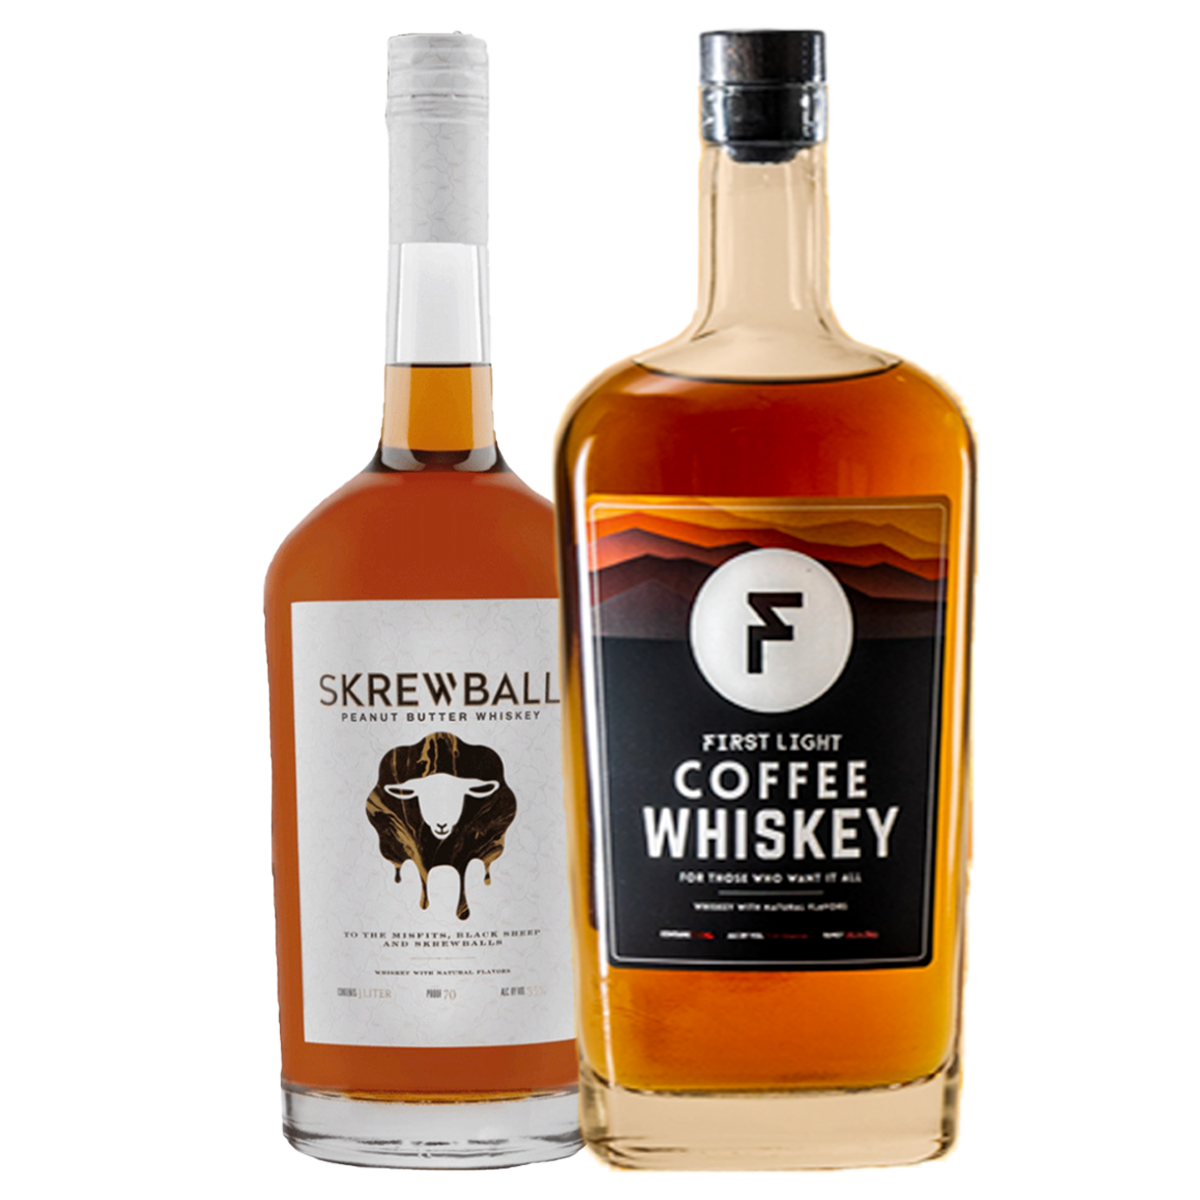 Skrewball Peanut Butter Whiskey x First Light Coffee Whiskey Combo - Barbank